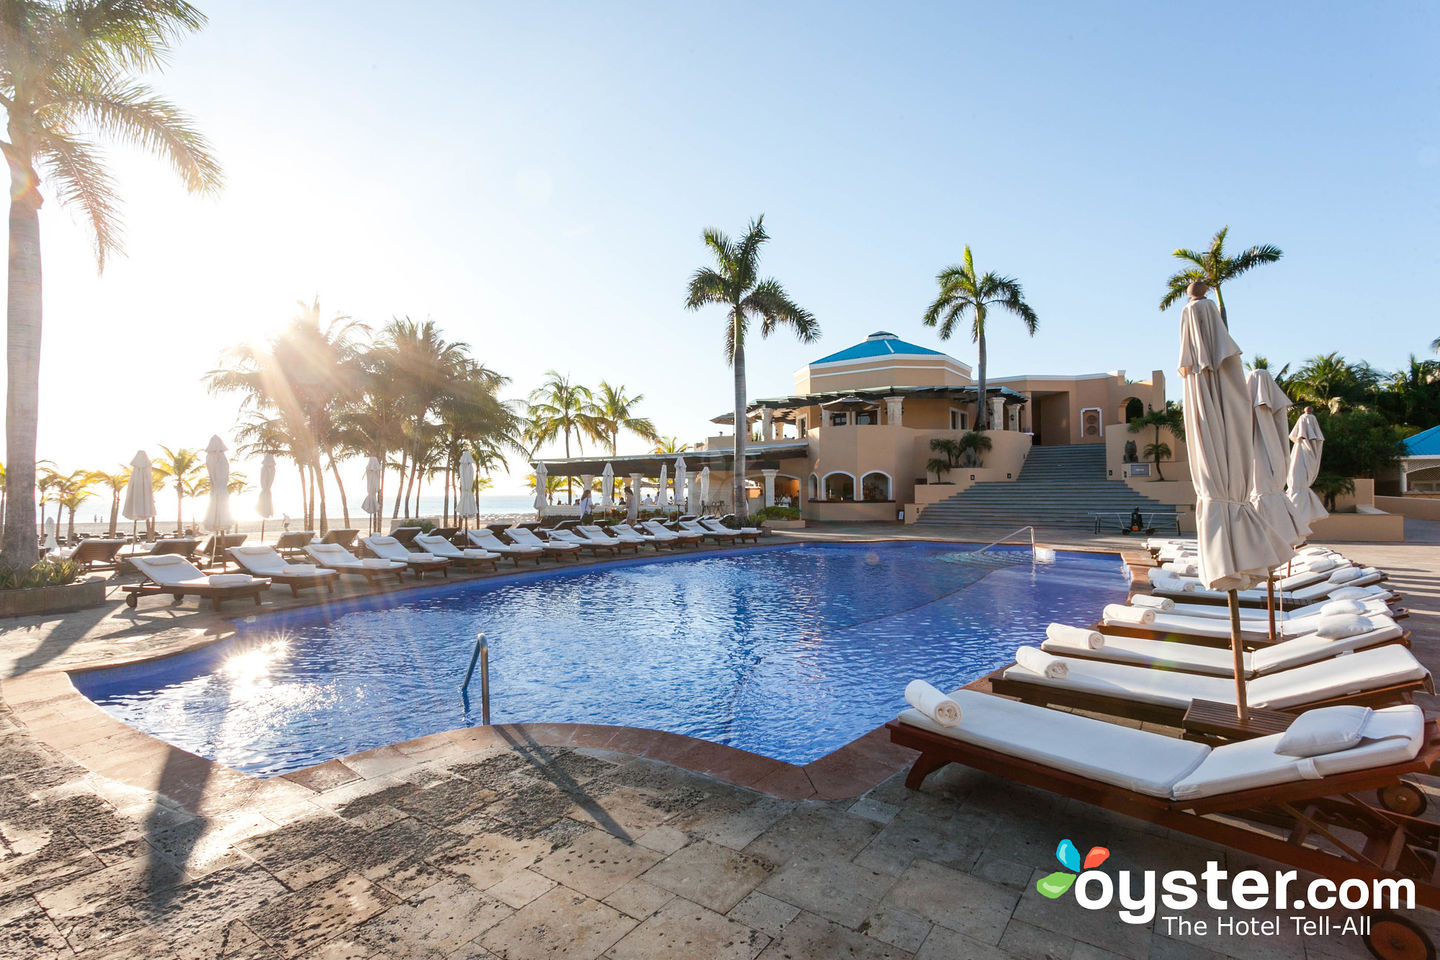 Royal Hideaway Playacar Review: What To REALLY Expect If You Stay